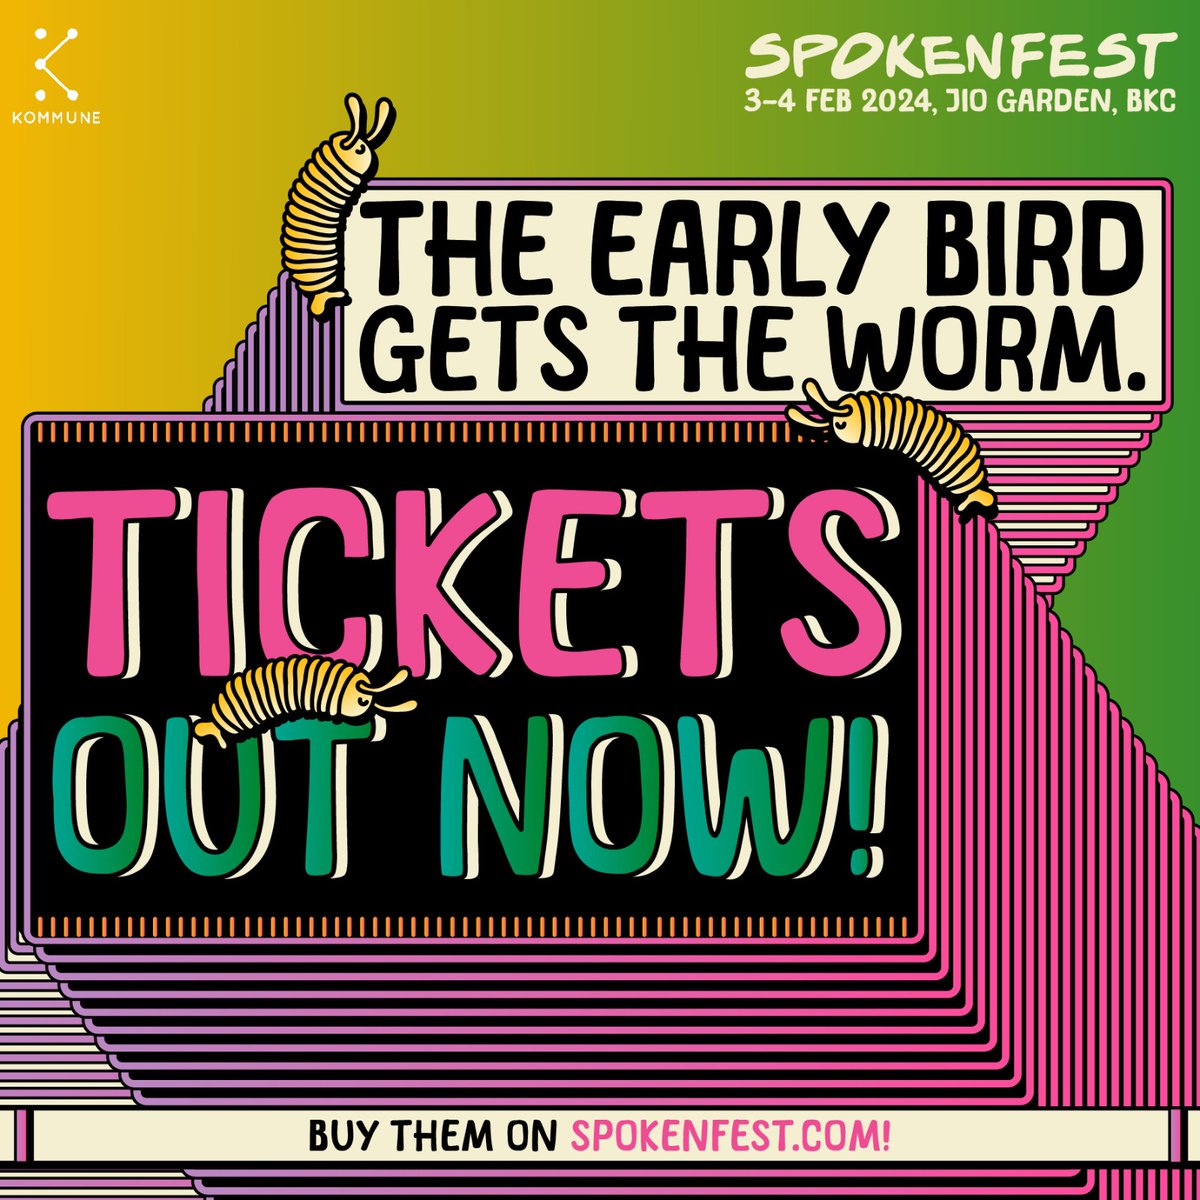 Tickets now live!! Suuper limited early bird tickets, get yours quickly!